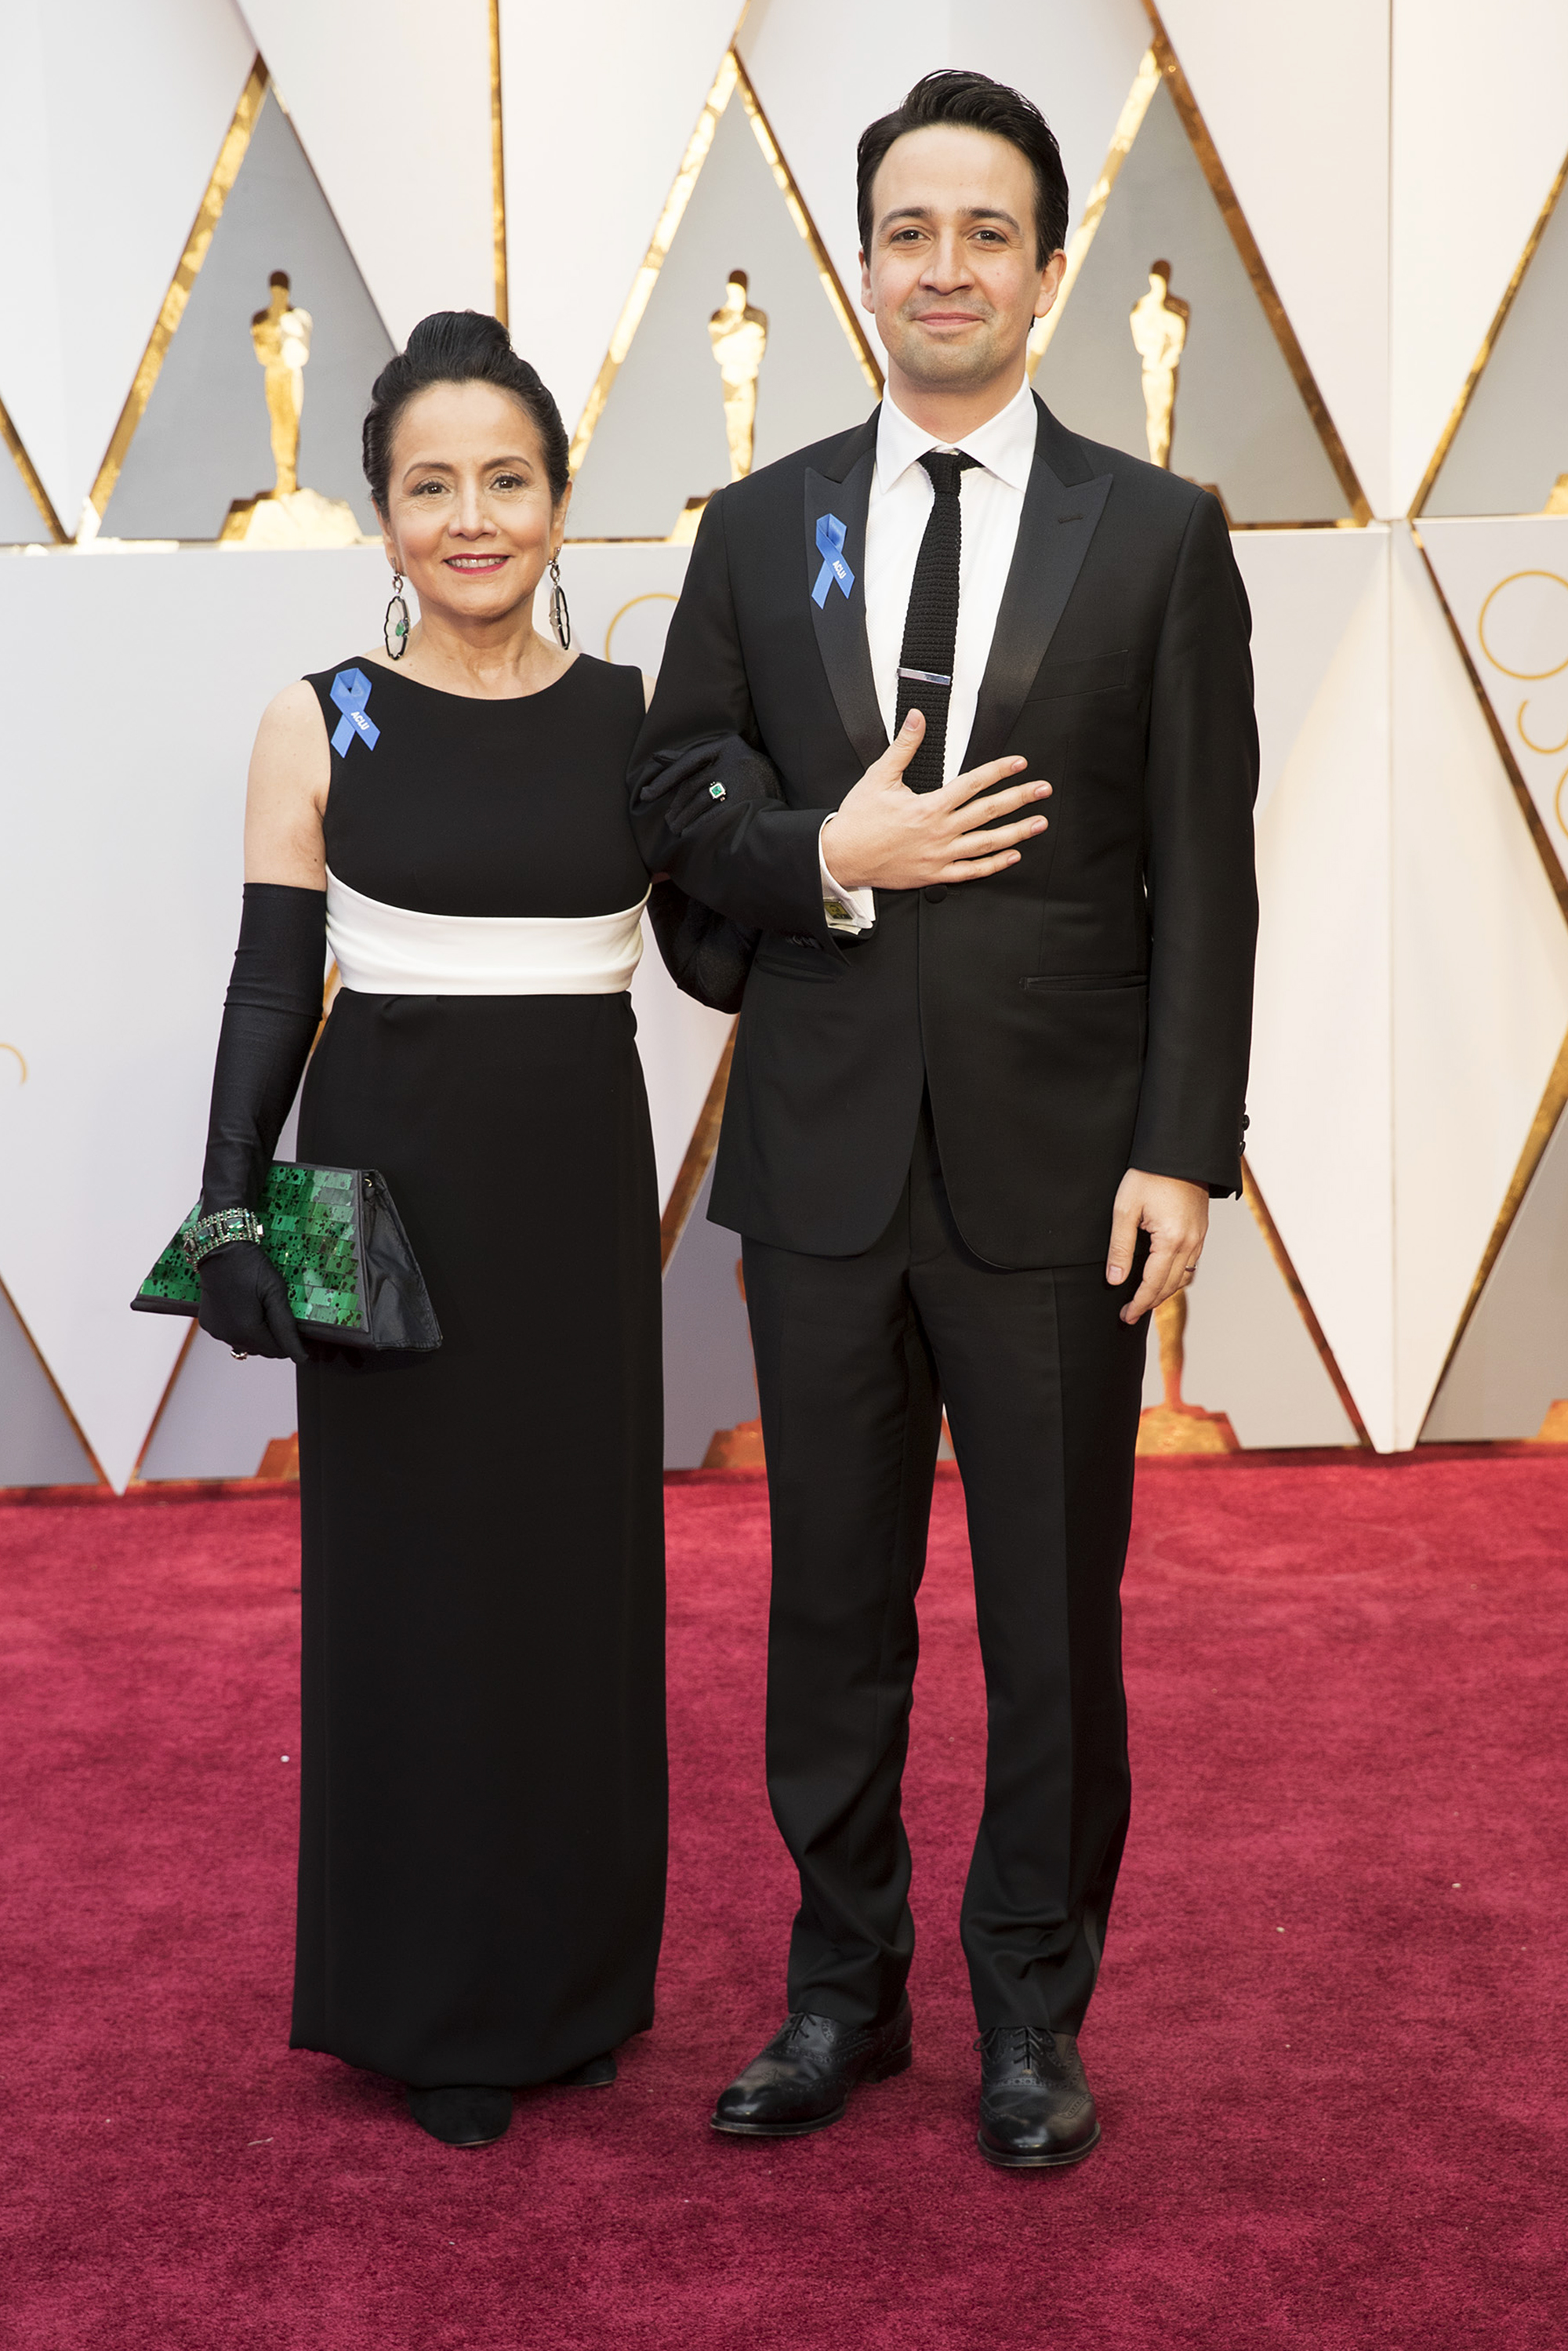 Luz Towns-Miranda and Lin-Manuel Miranda on the red carpet for the 89th Oscars, on Feb. 26, 2017 in Hollywood, Calif.